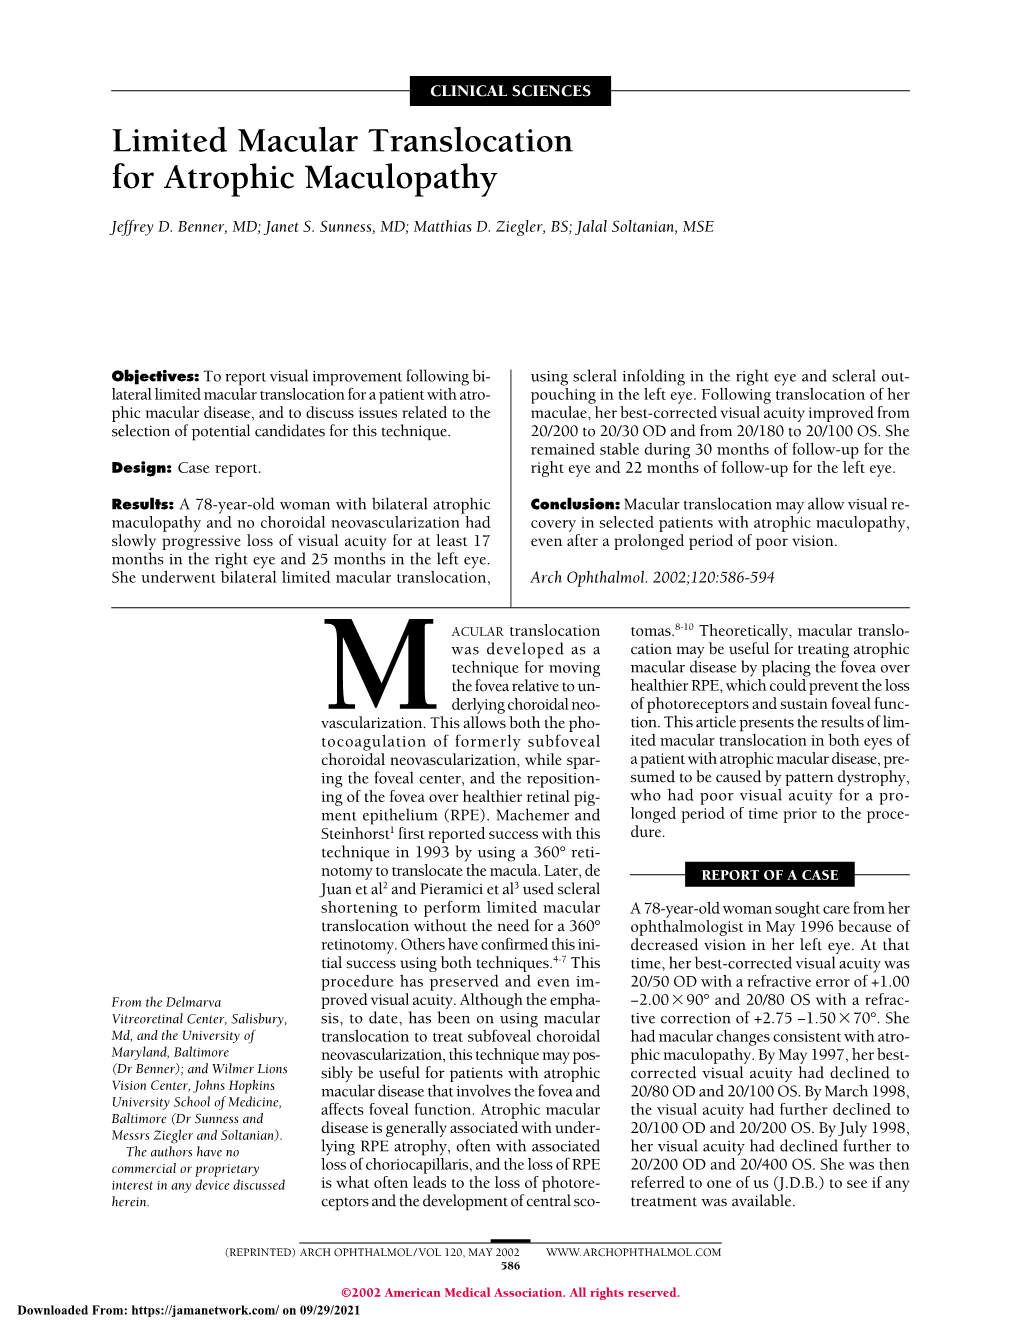 Limited Macular Translocation for Atrophic Maculopathy